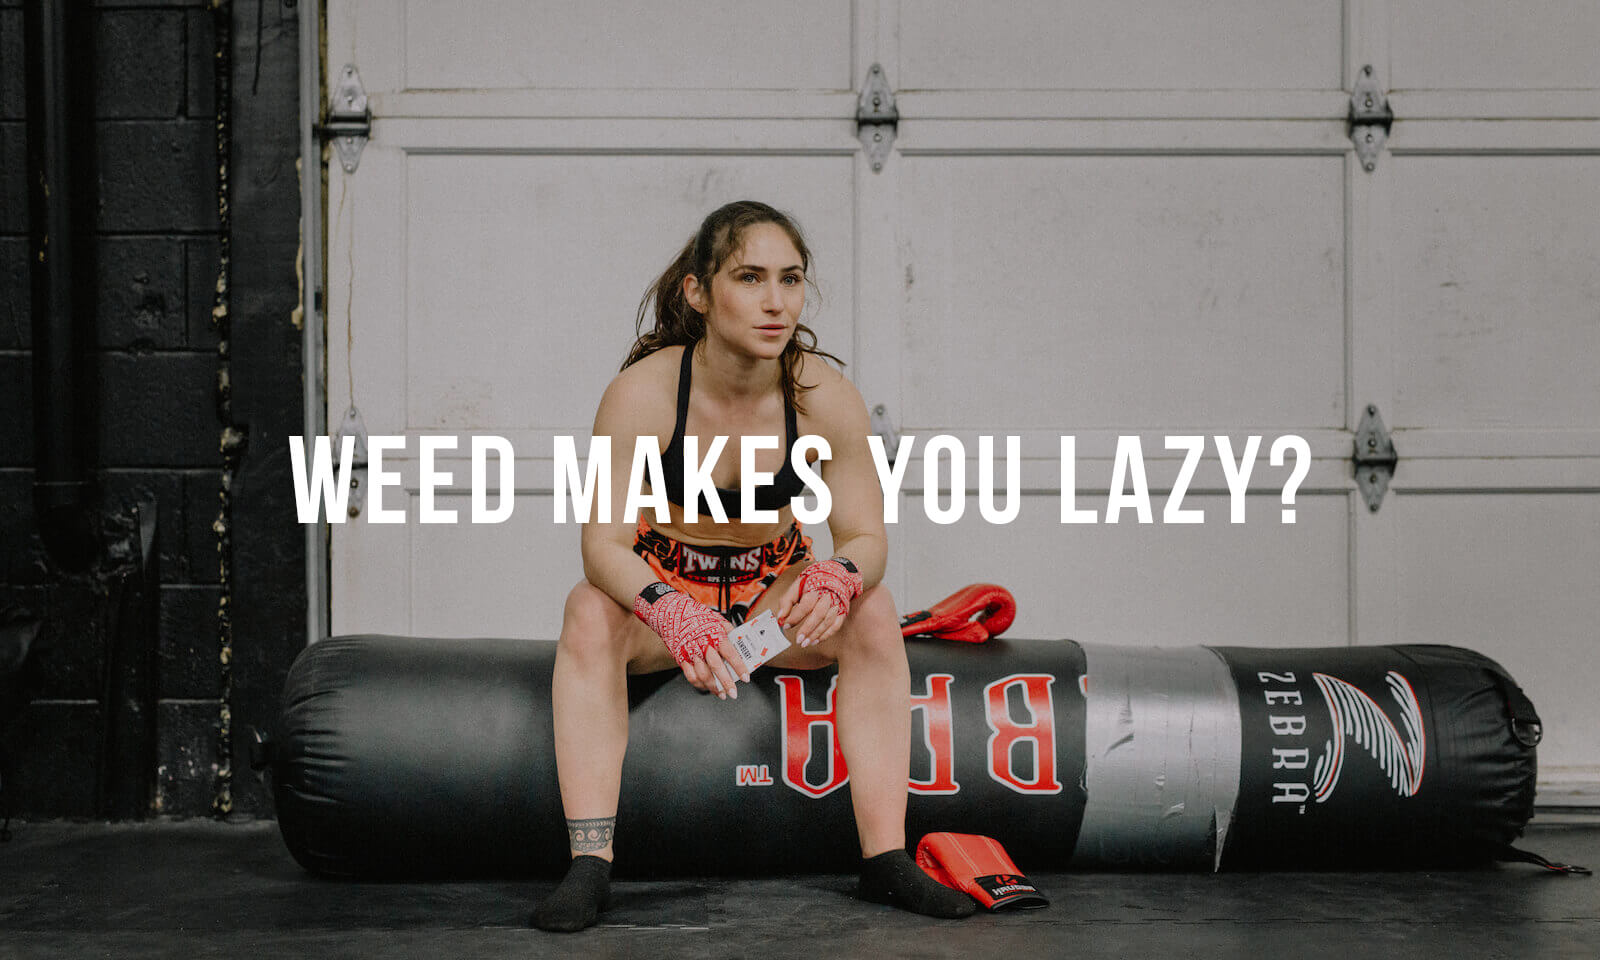 Does Weed Make You Lazy?